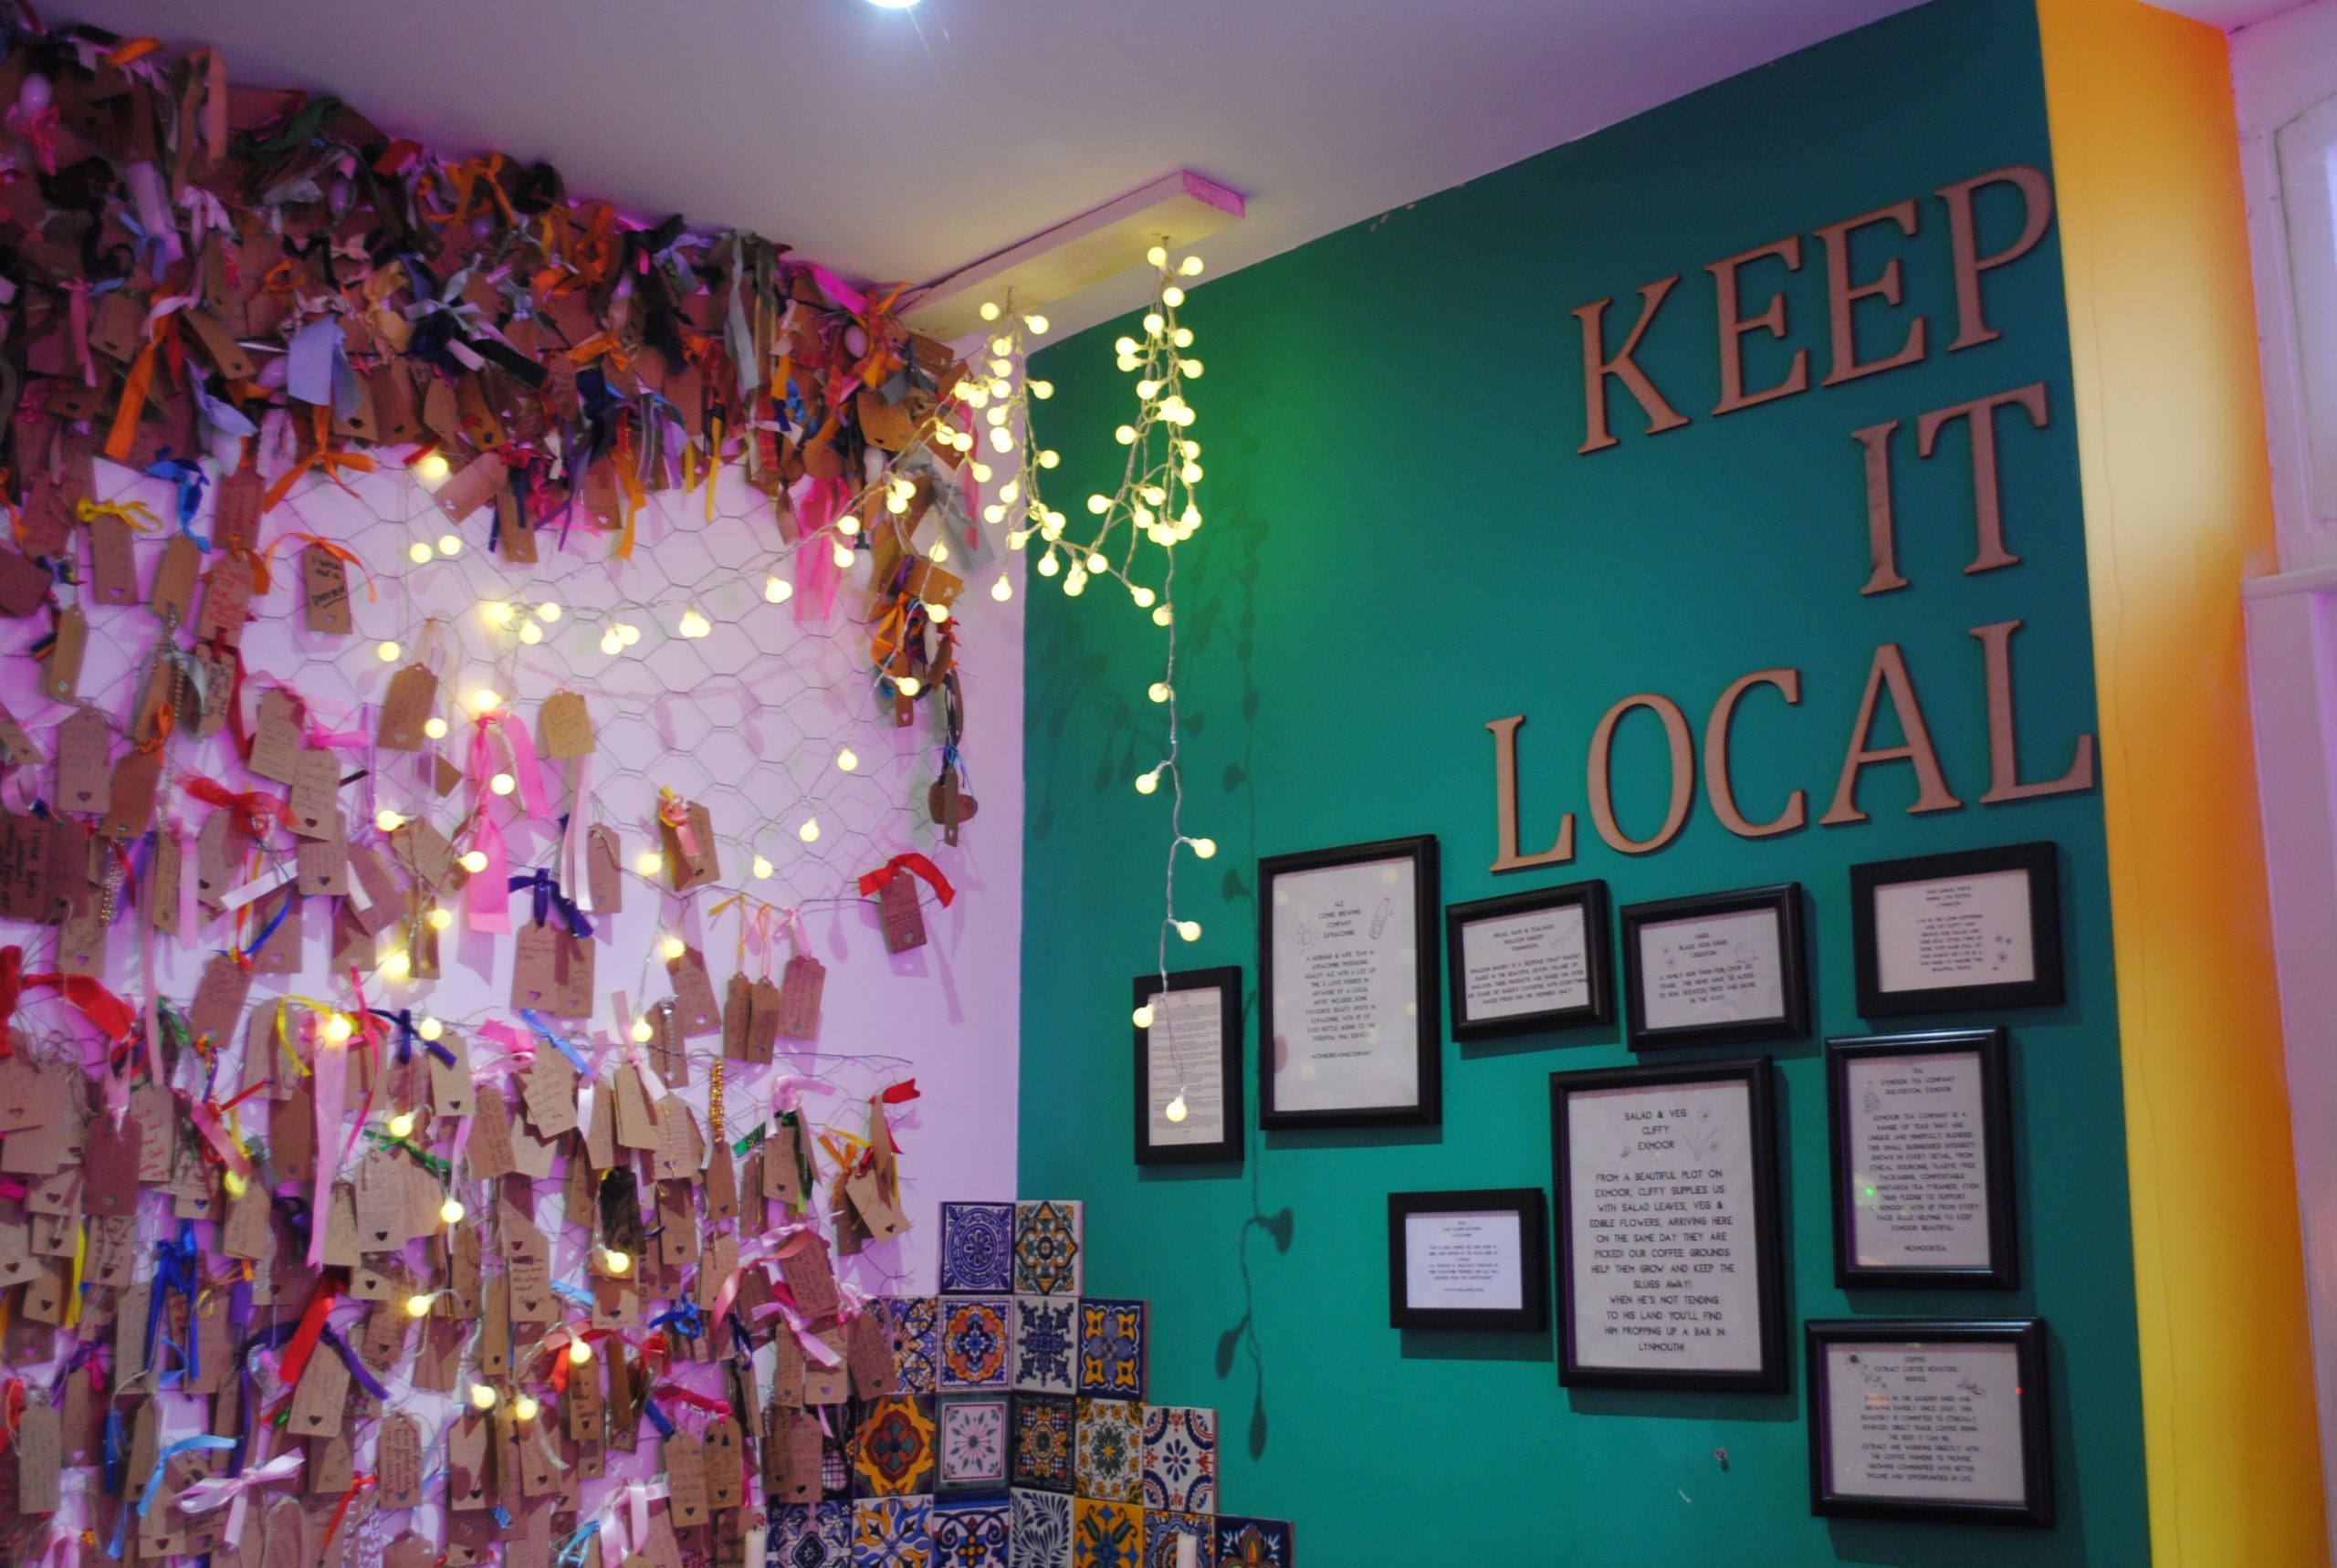 Corner of Charlie Fridays cafe restaurant with pictures and flowers and fairy lights and "Keep it local" sign